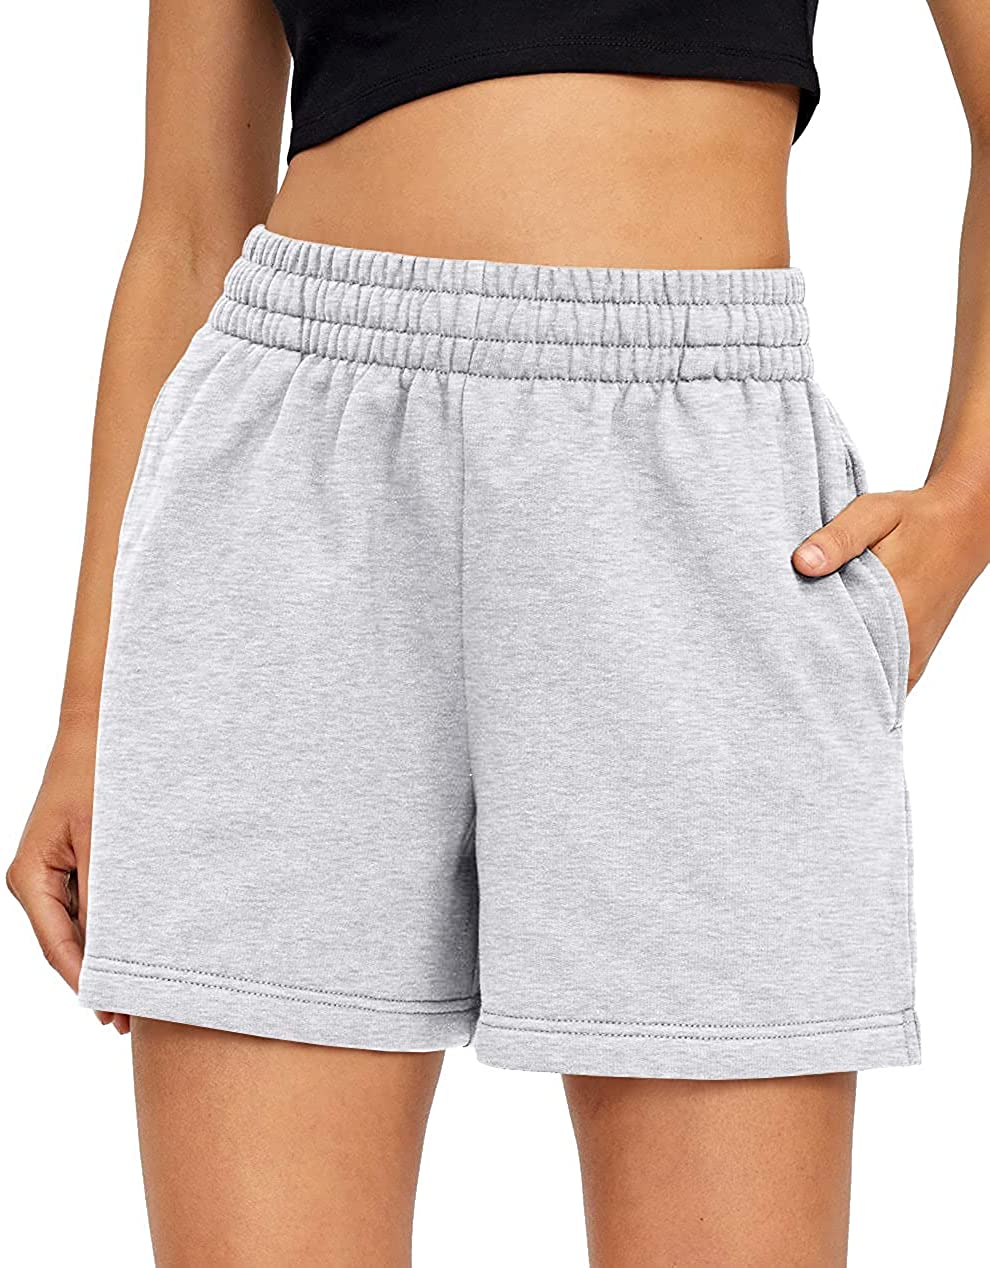 AUTOMET Womens Sweat Shorts Casual Summer Athletic Shorts Comfy